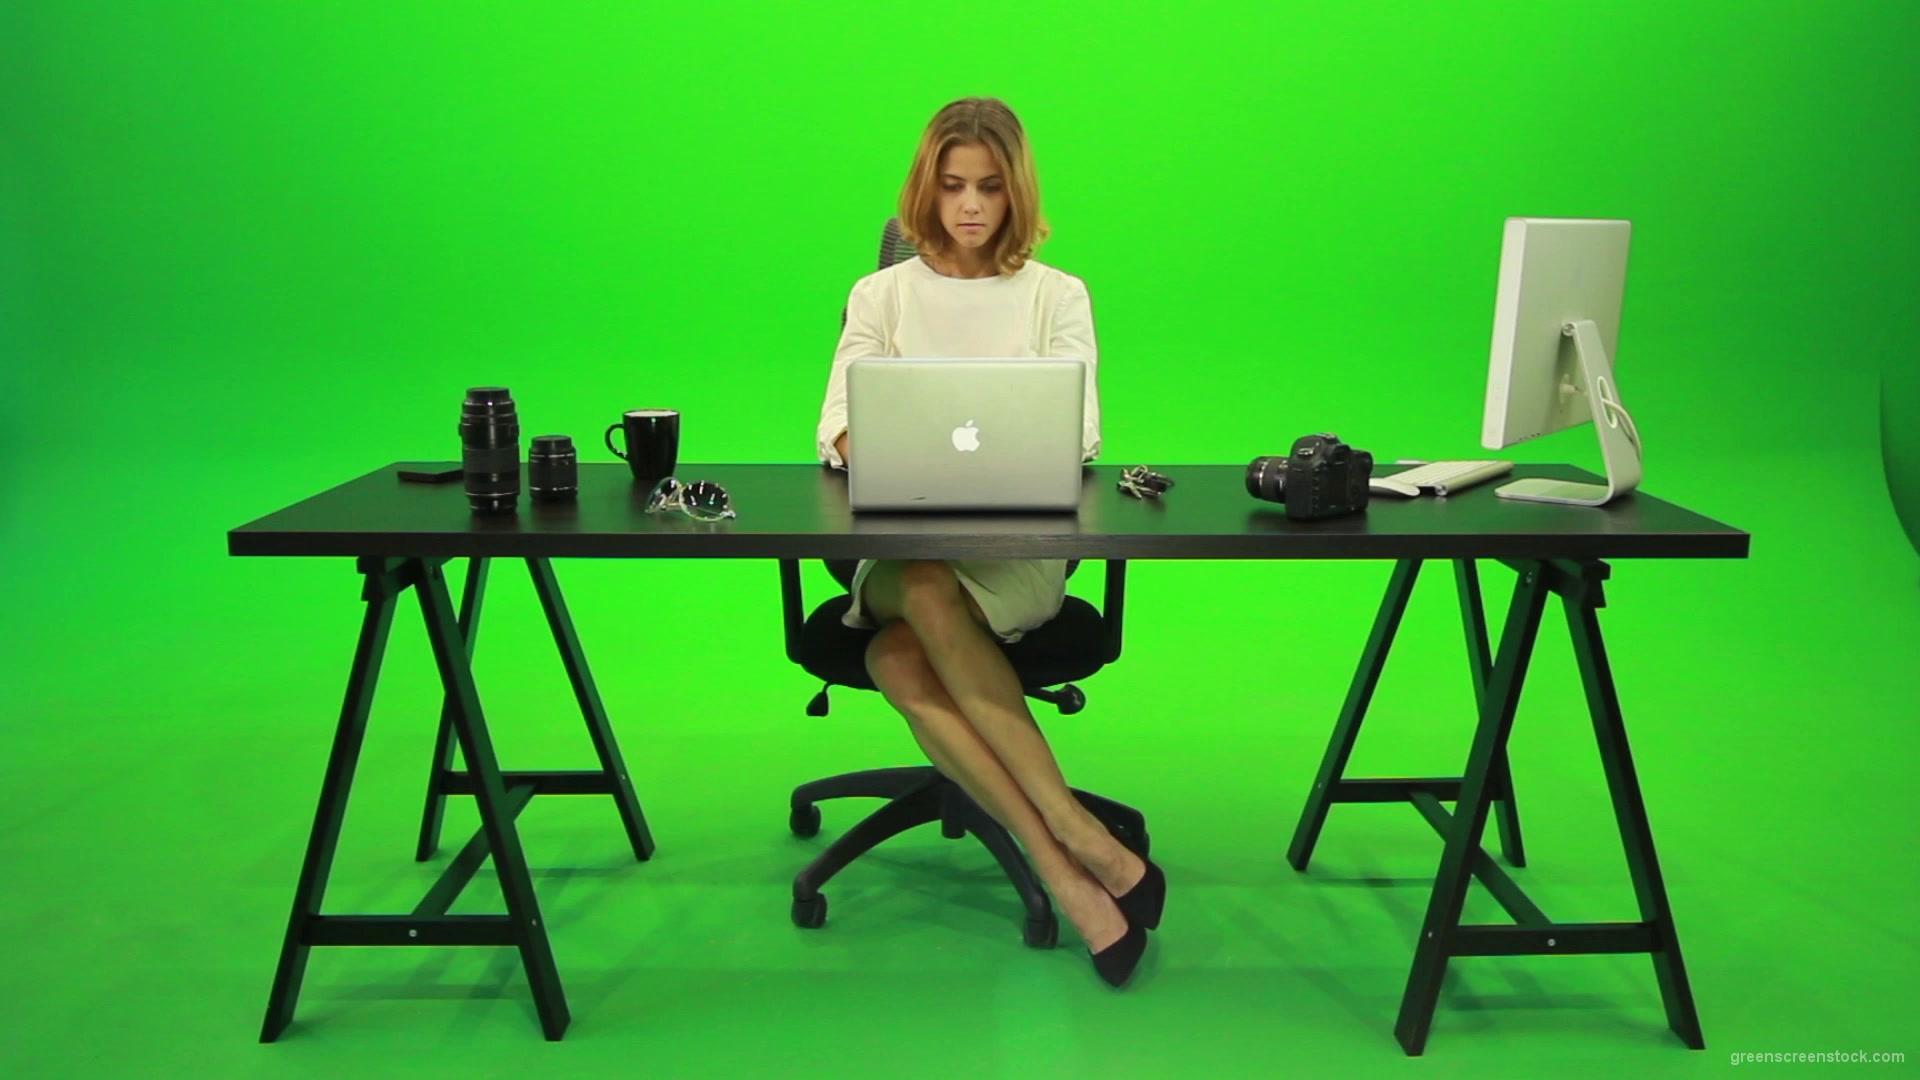 Business-Woman-Working-in-the-Office-Green-Screen-Footage_004 Green Screen Stock